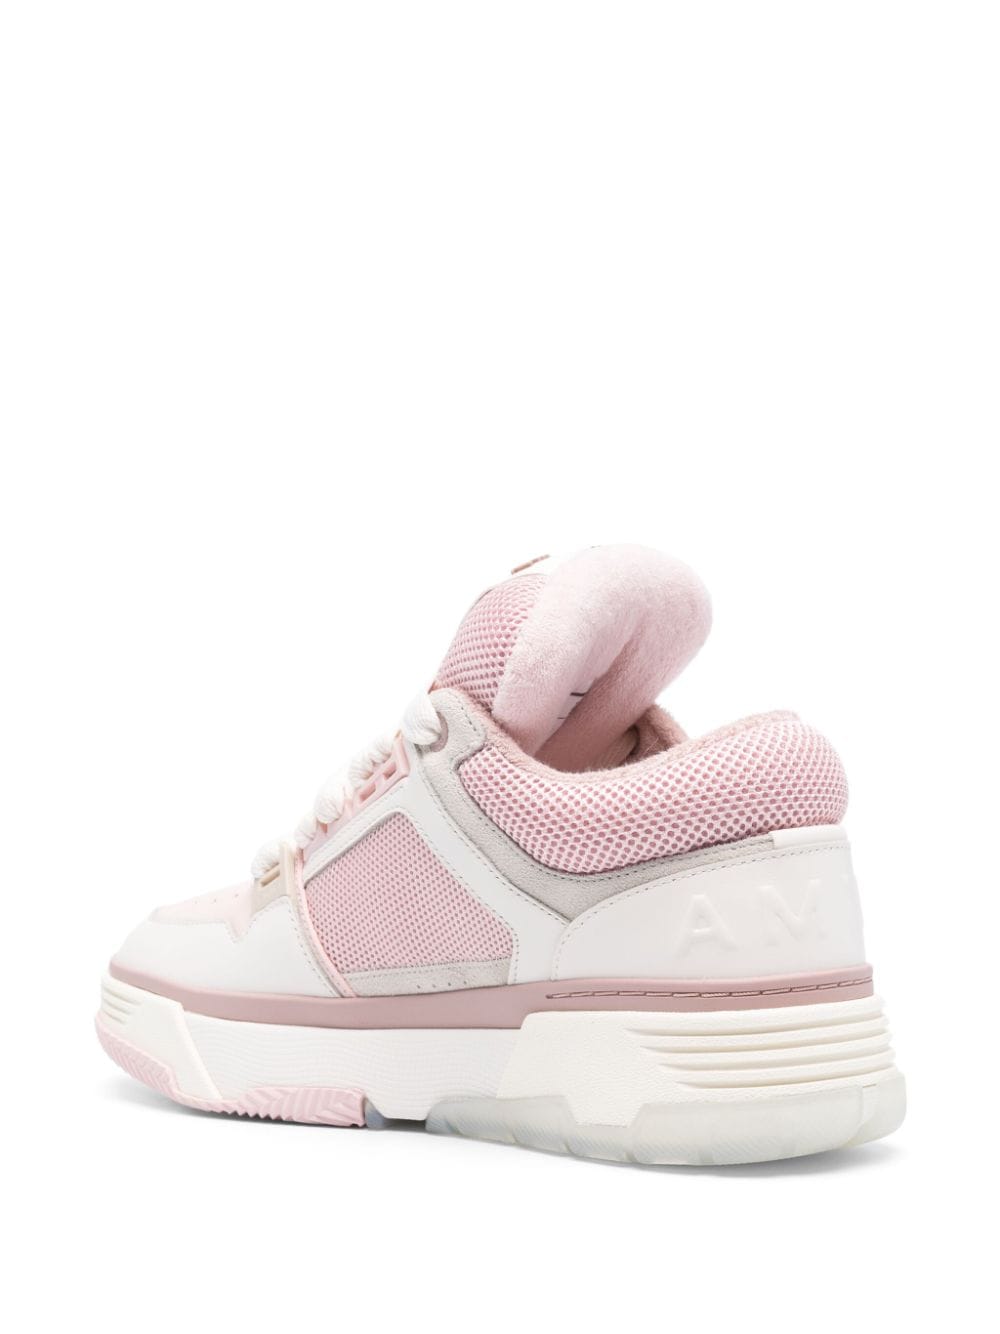 MA-1 panelled sneakers